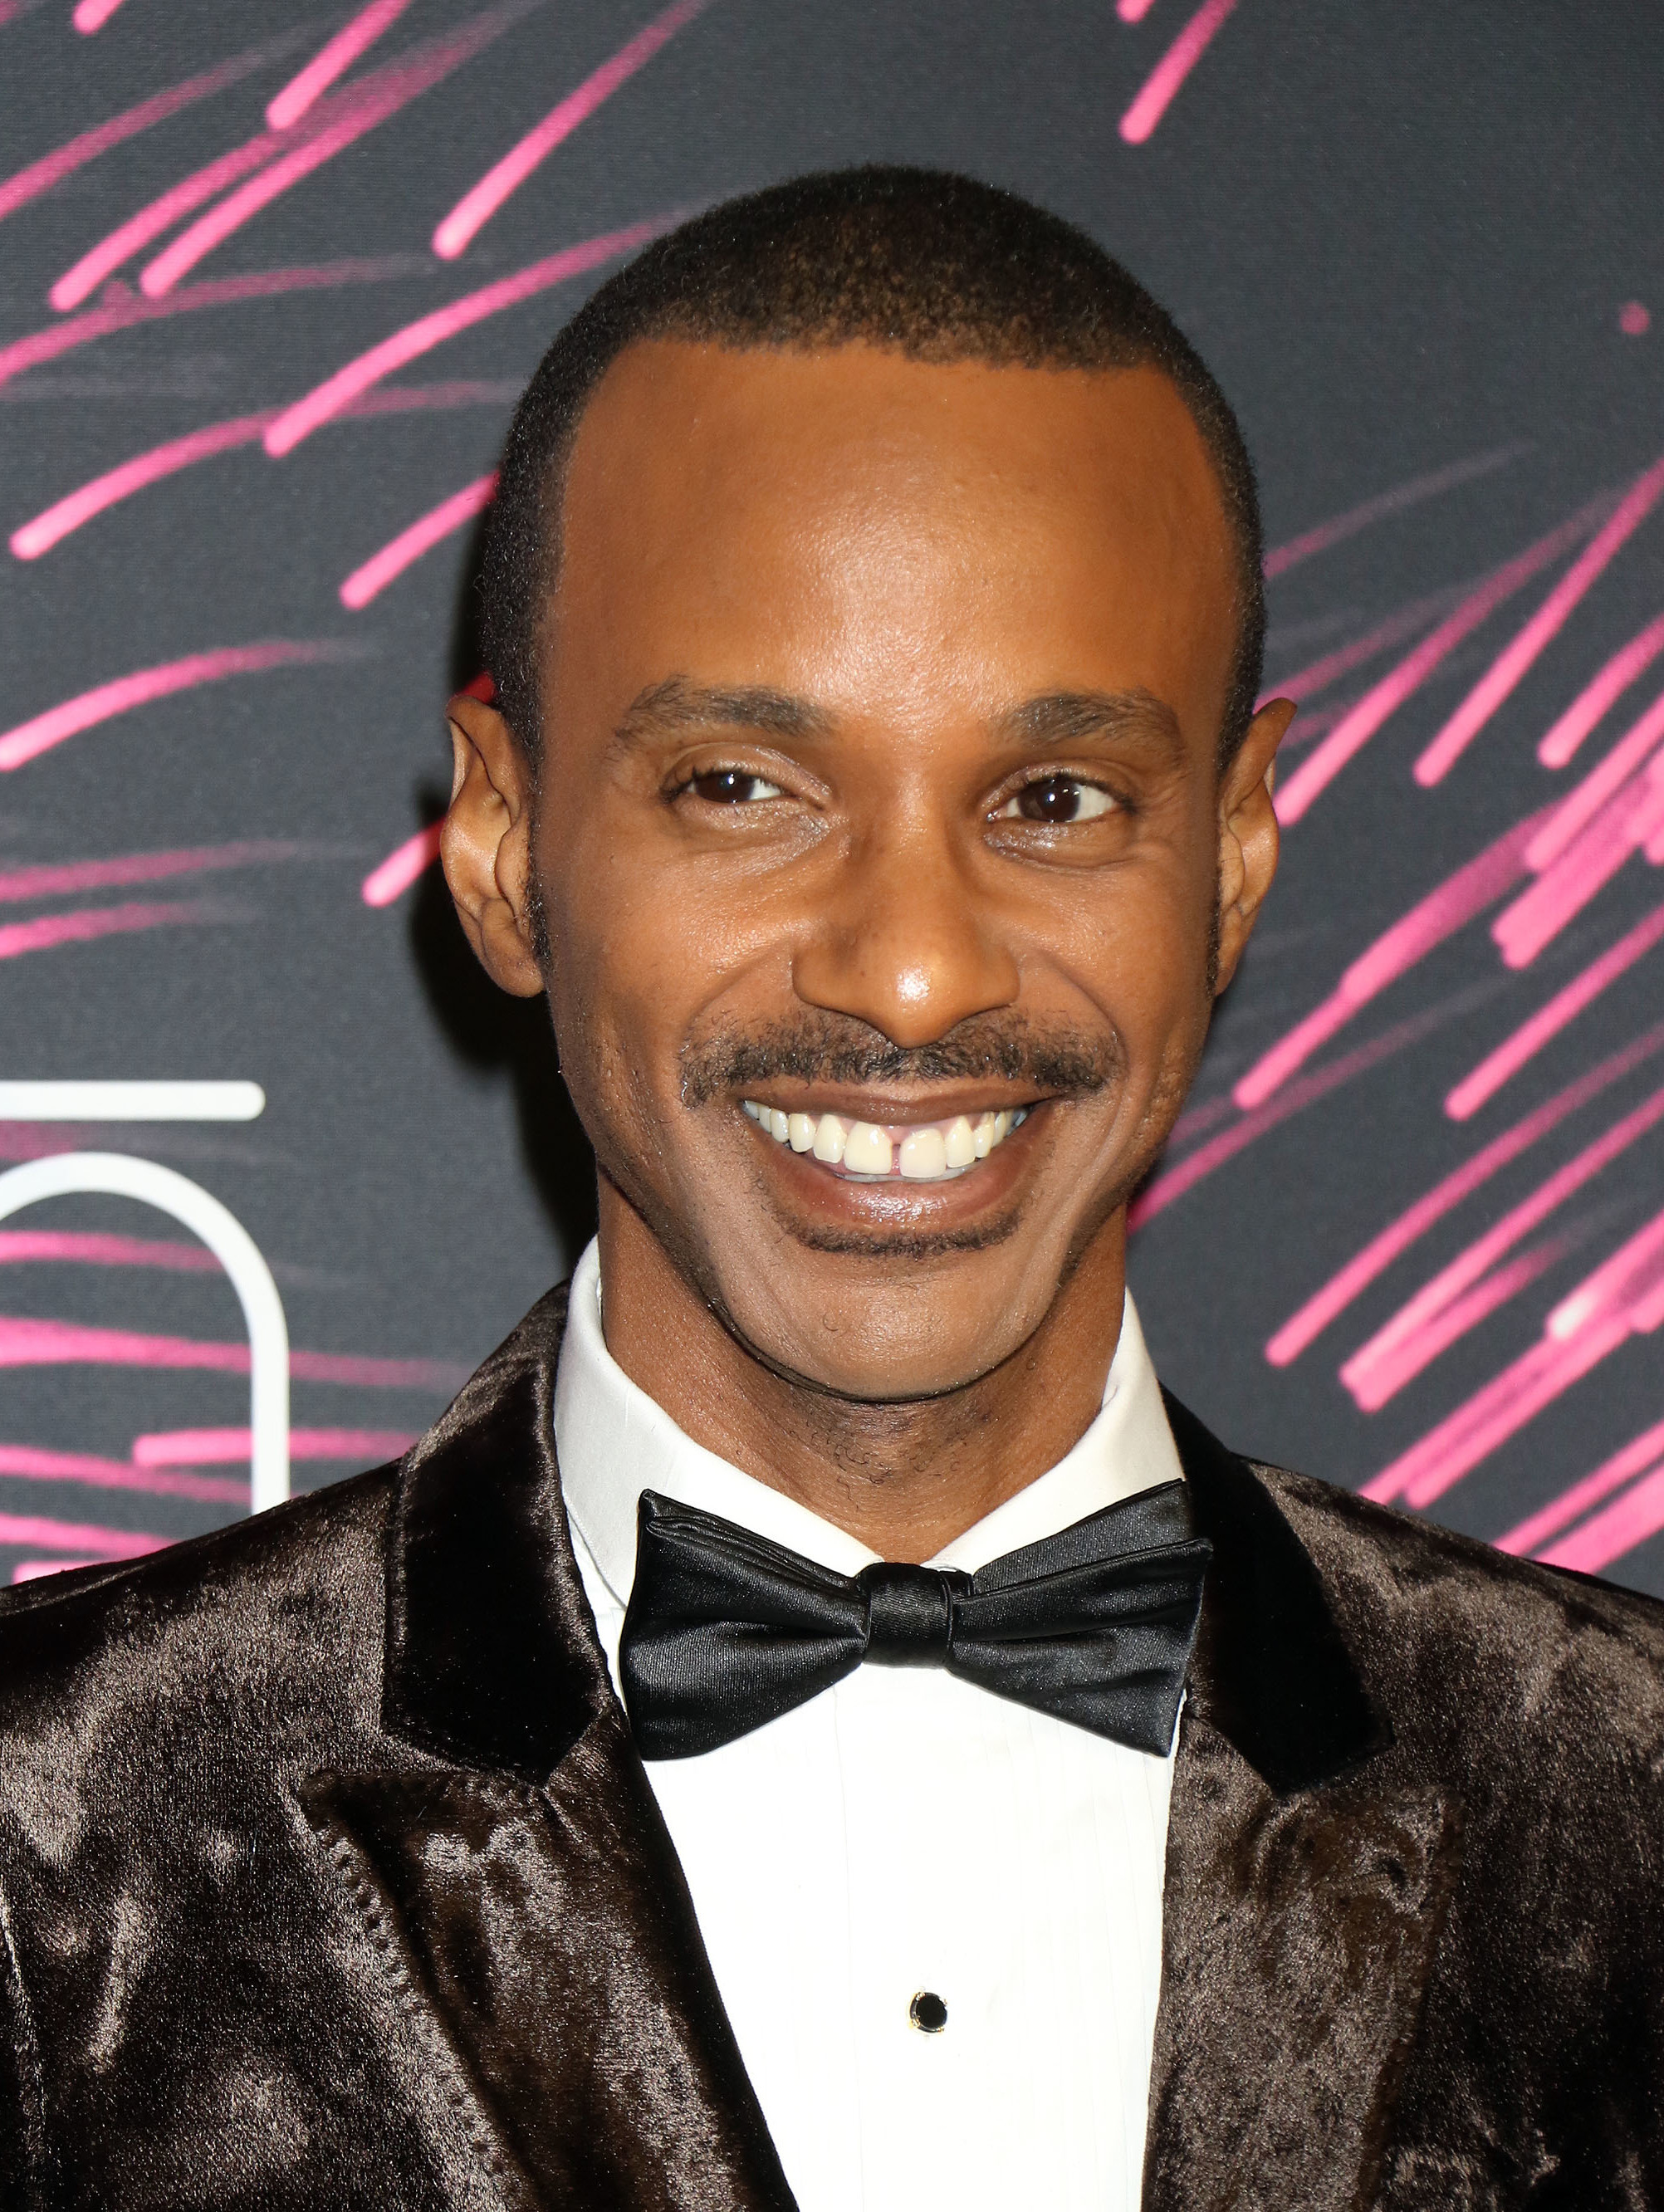 Tevin Campbell Is Making A Comeback 99.3105.7 Kiss FM